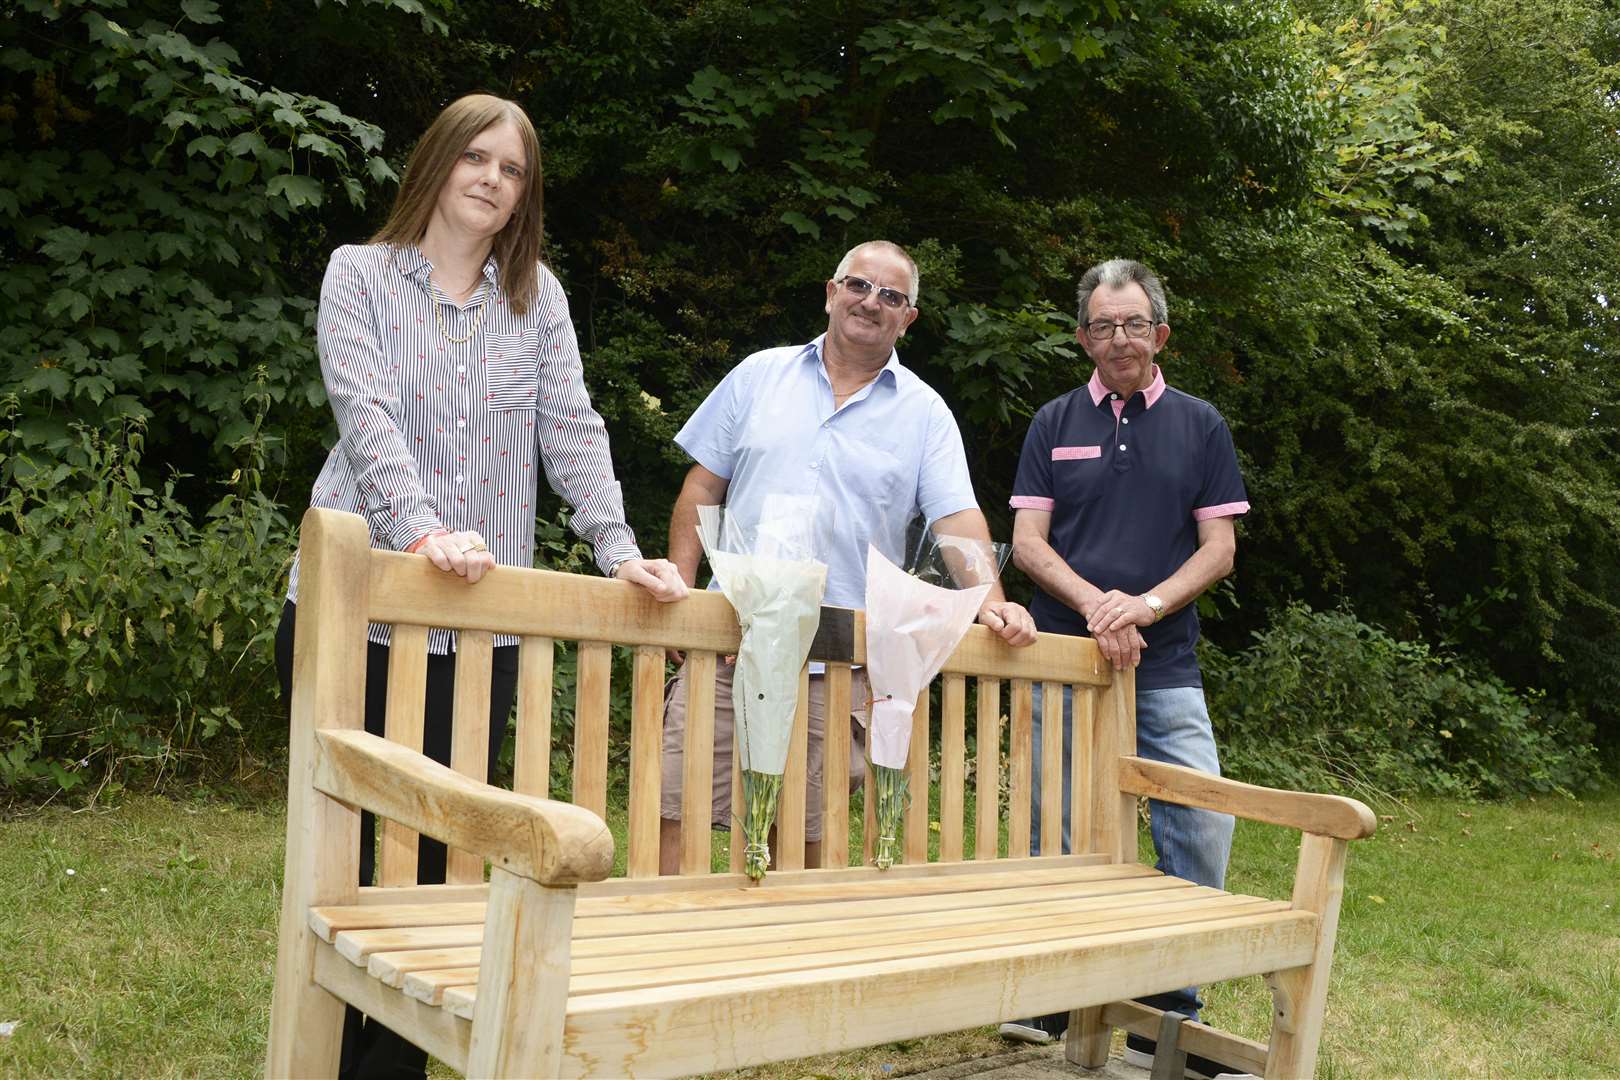 A bench was installed in memory of Amanda Champion, pictured here with her cousin Jo Champion and supporters Brian Mabb and Chris Pimm